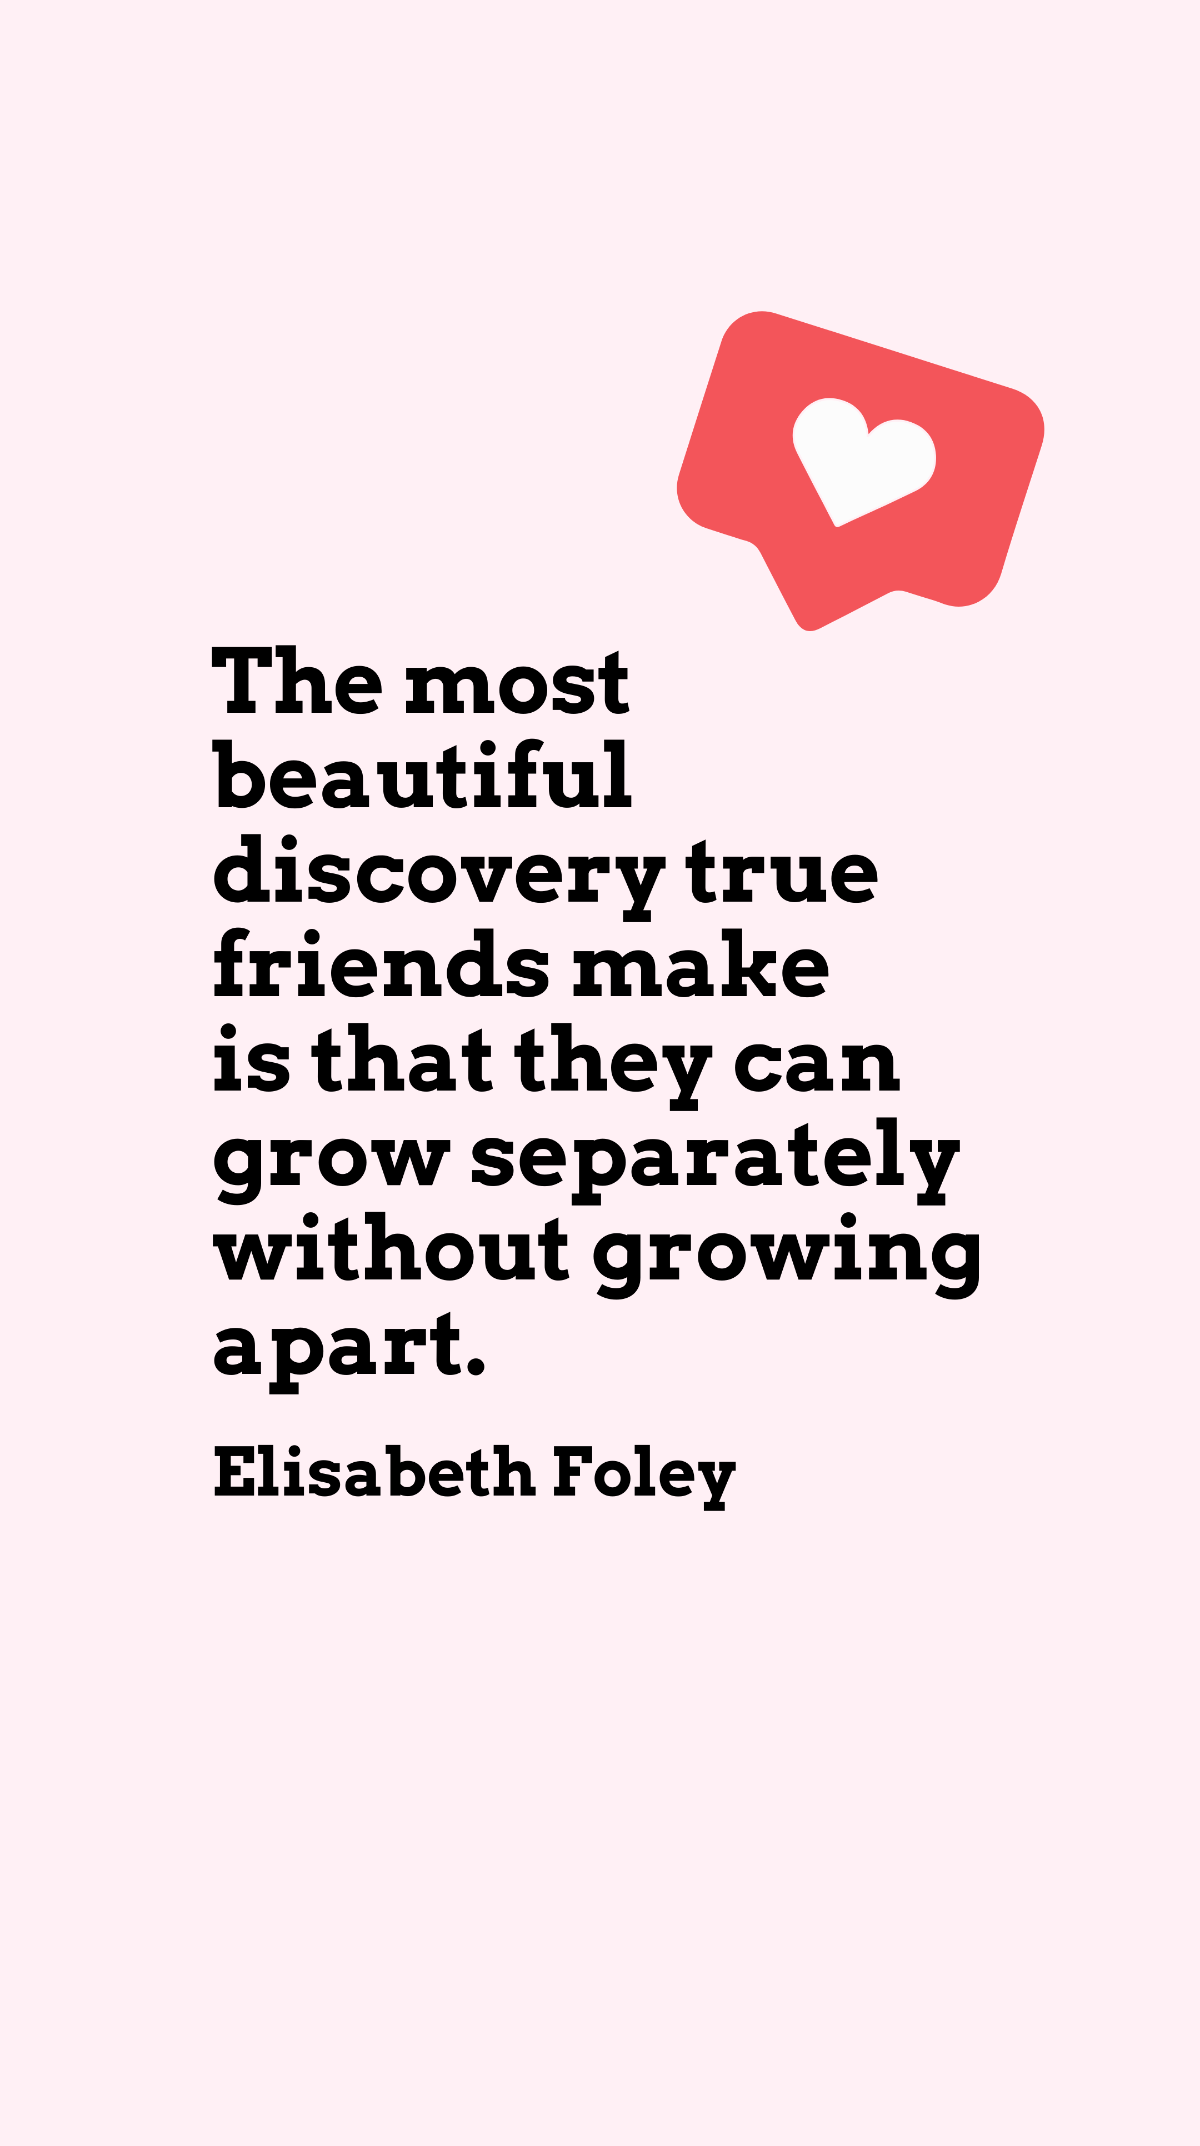 Elisabeth Foley - The most beautiful discovery true friends make is that they can grow separately without growing apart. Template